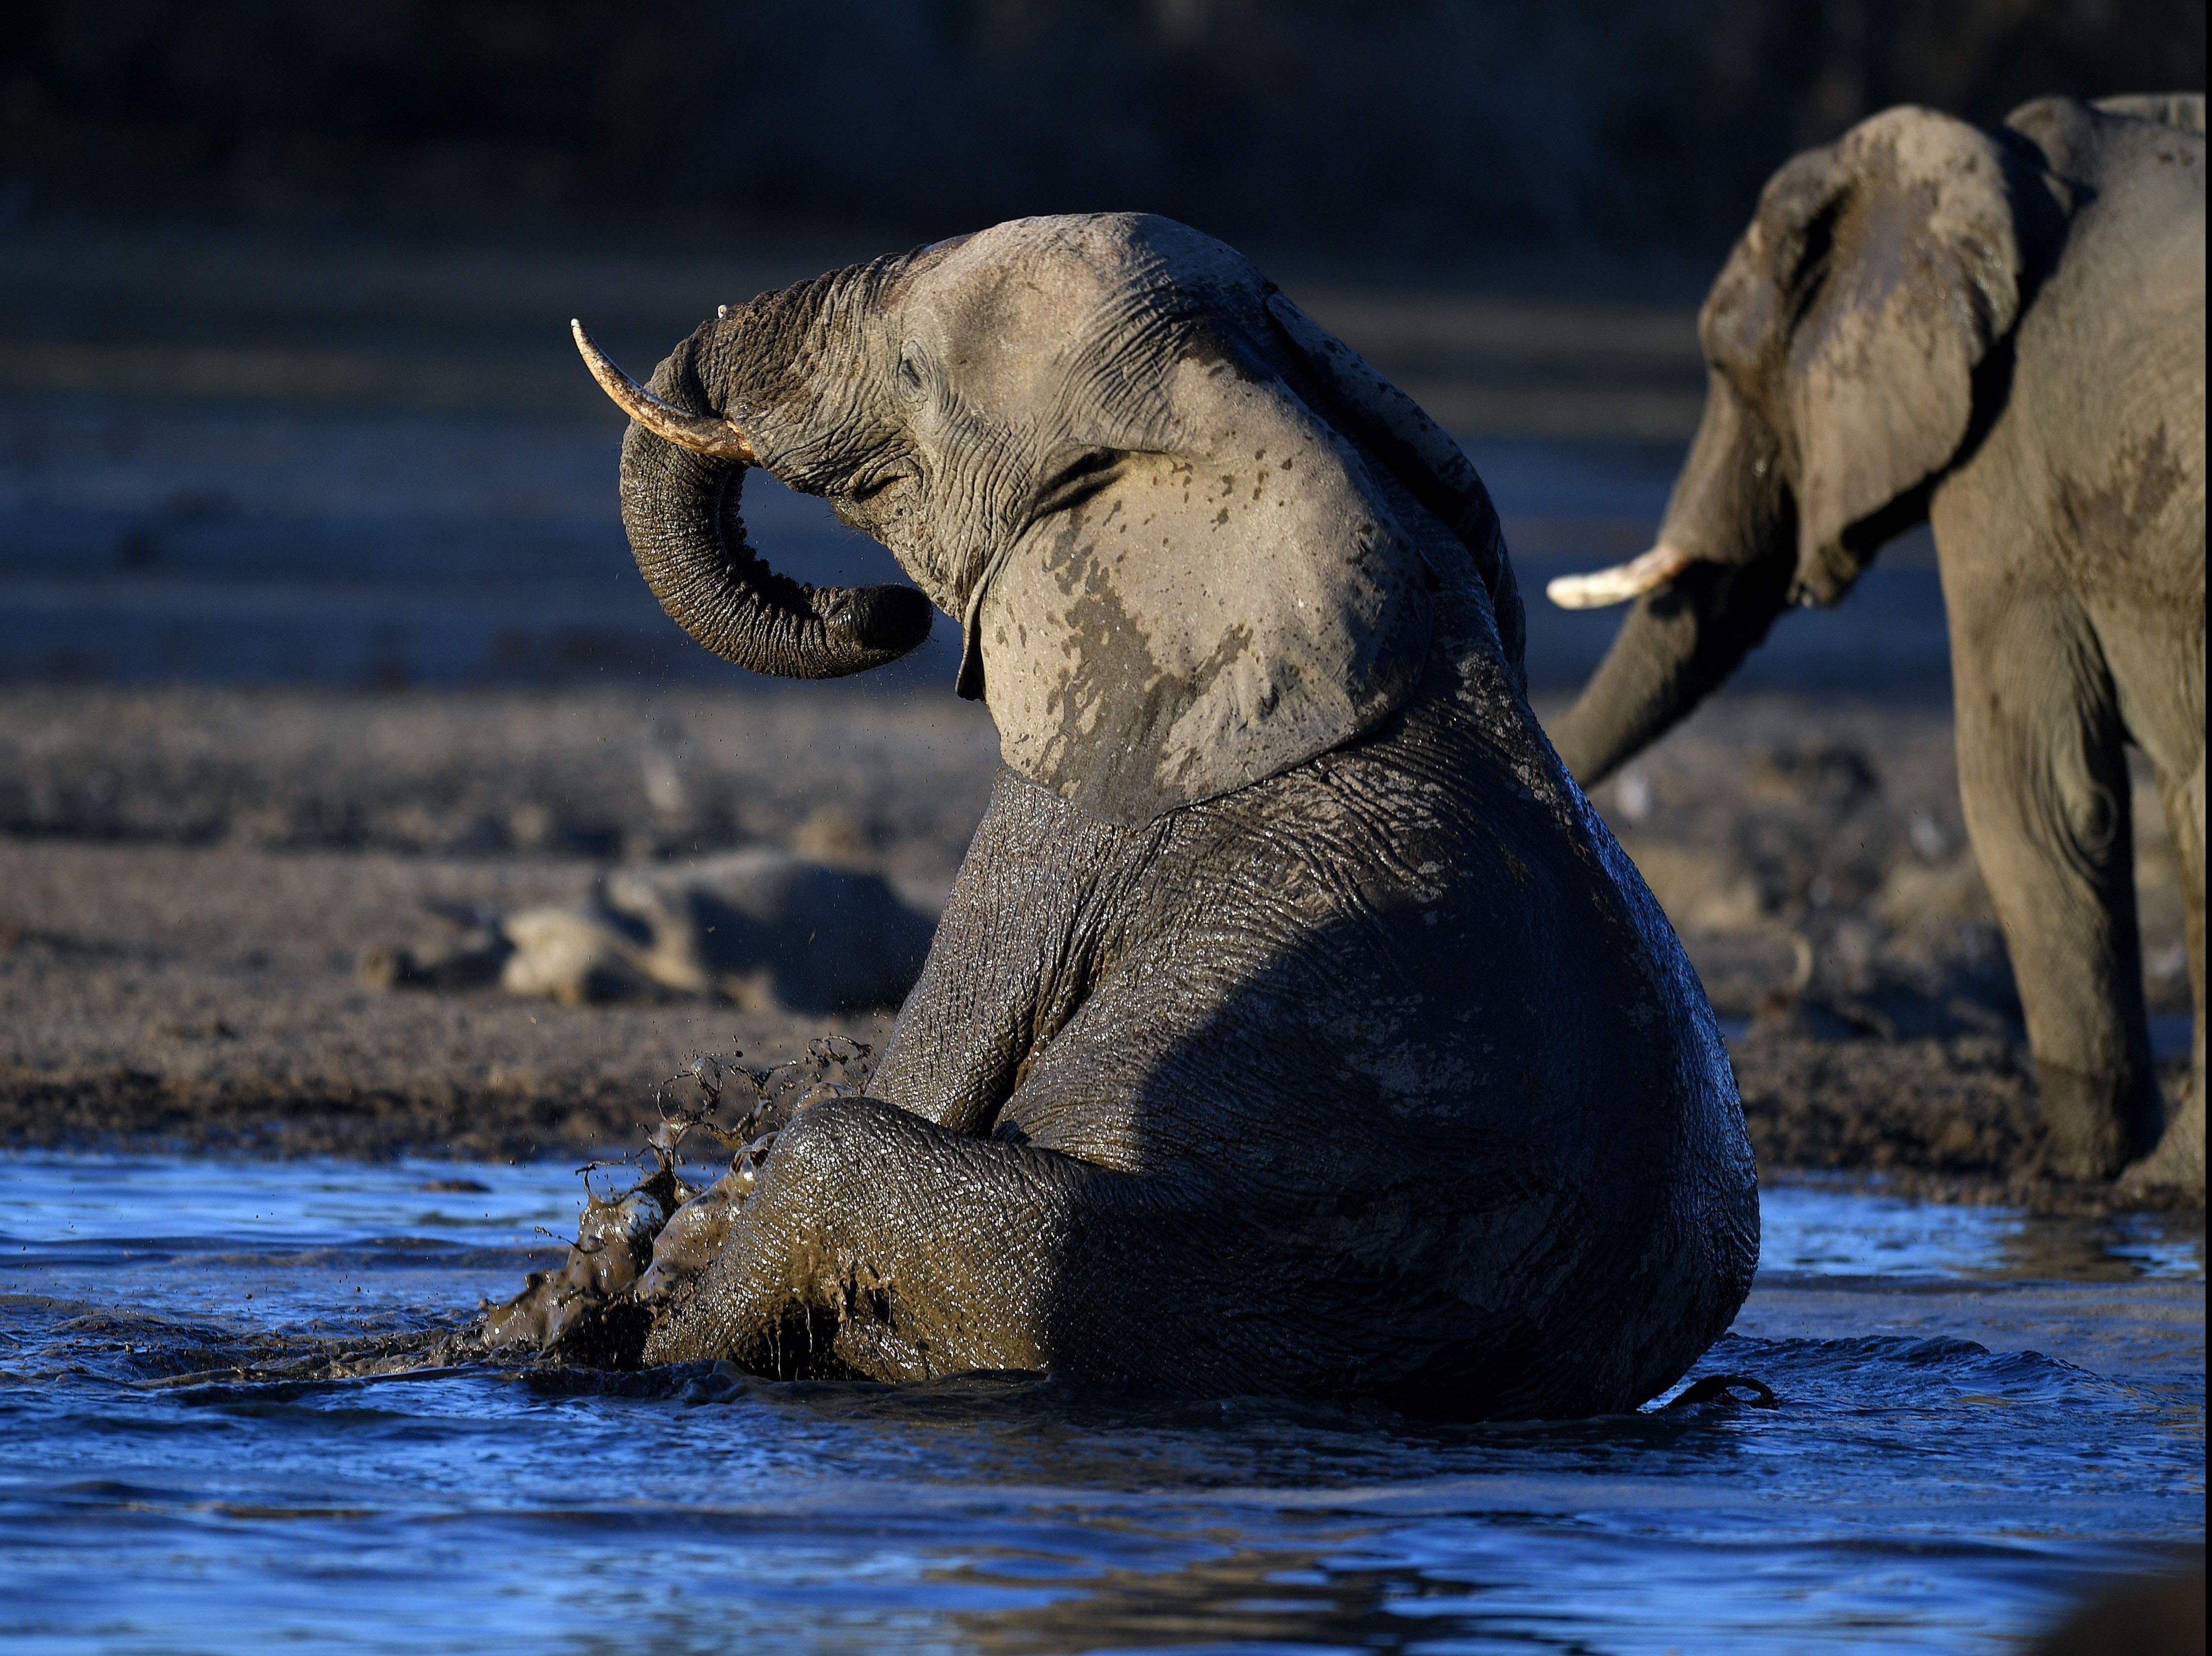 An elephant sits in water in the Okavango Delta near the Nxaraga village in the outskirt of Maun, Botswana